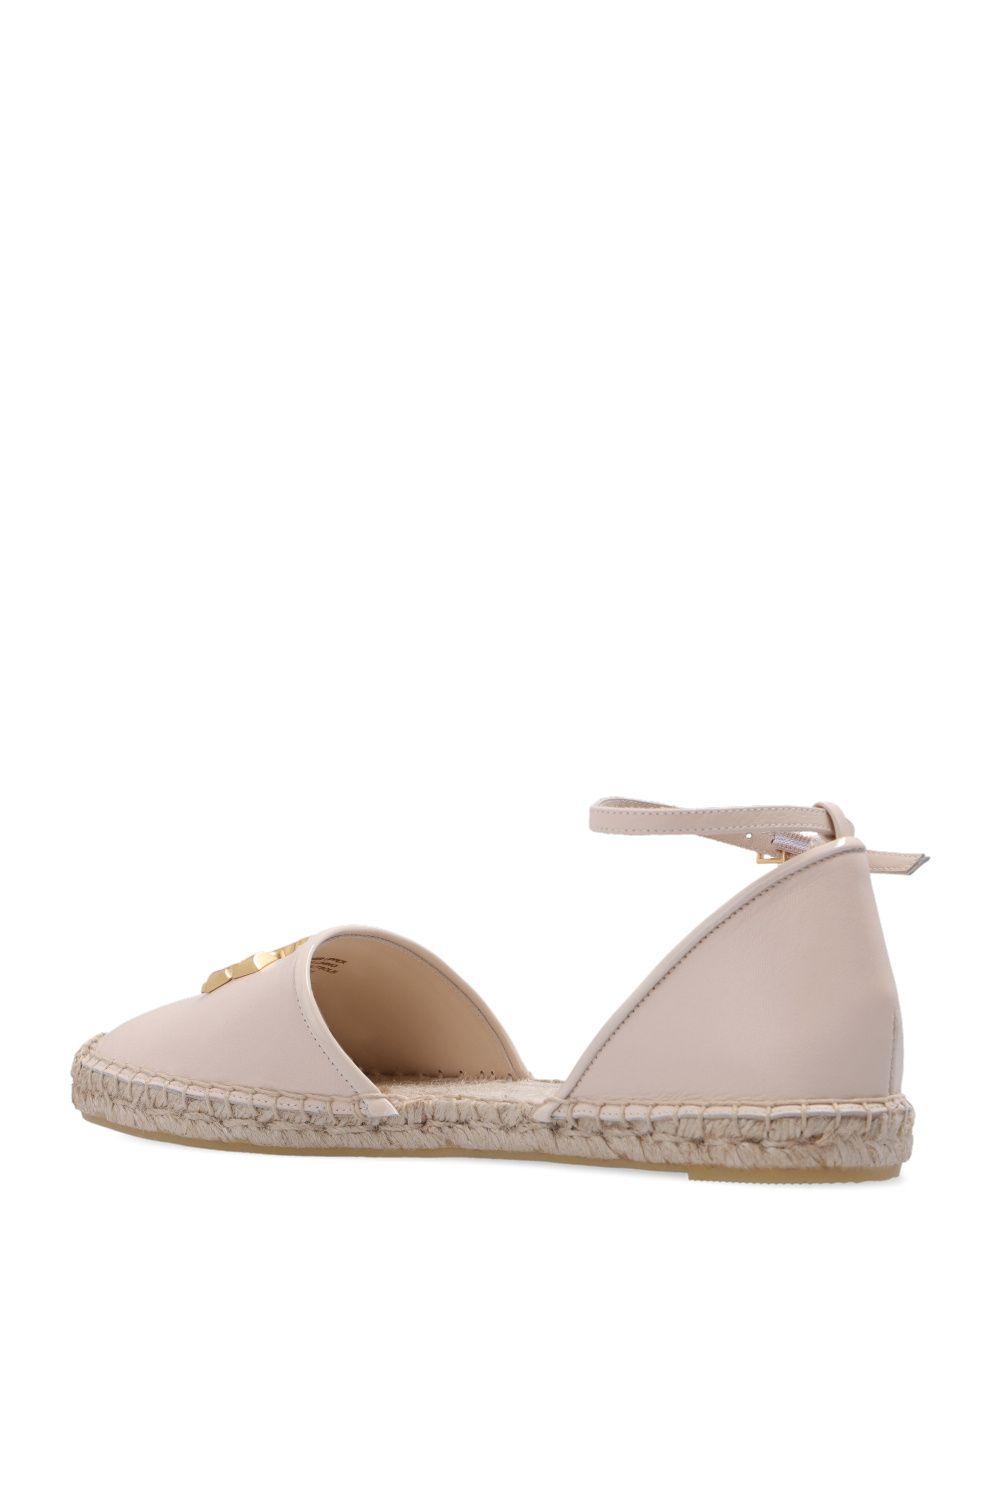 Tory Burch 'eleanor D'orsay' Espadrilles in Natural | Lyst